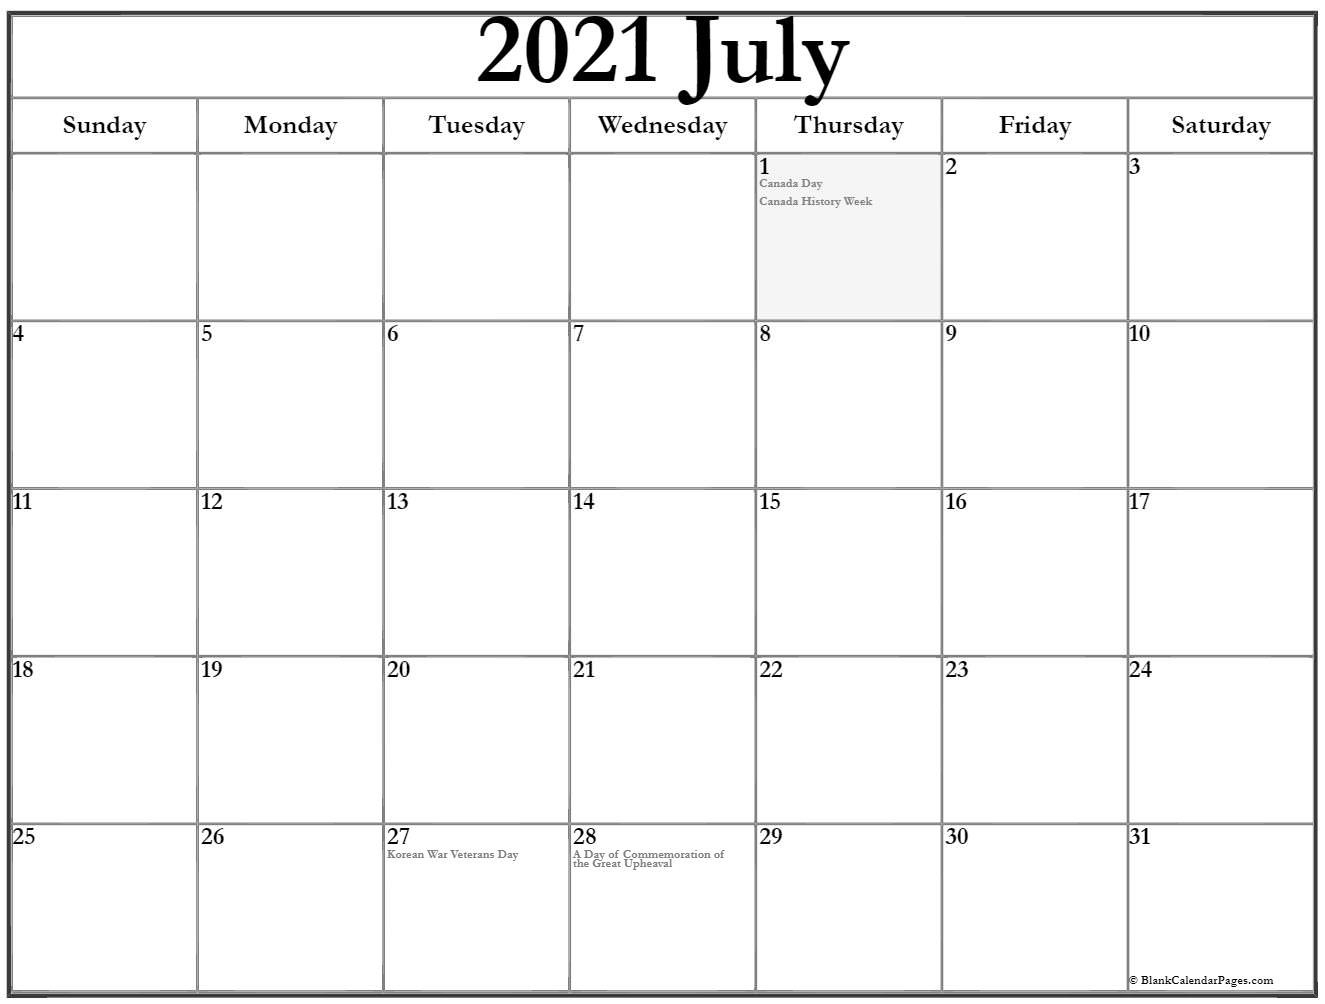 Collection Of July 2021 Calendars With Holidays-Canadian Calendar 2021 With Holidays Printable Landscape